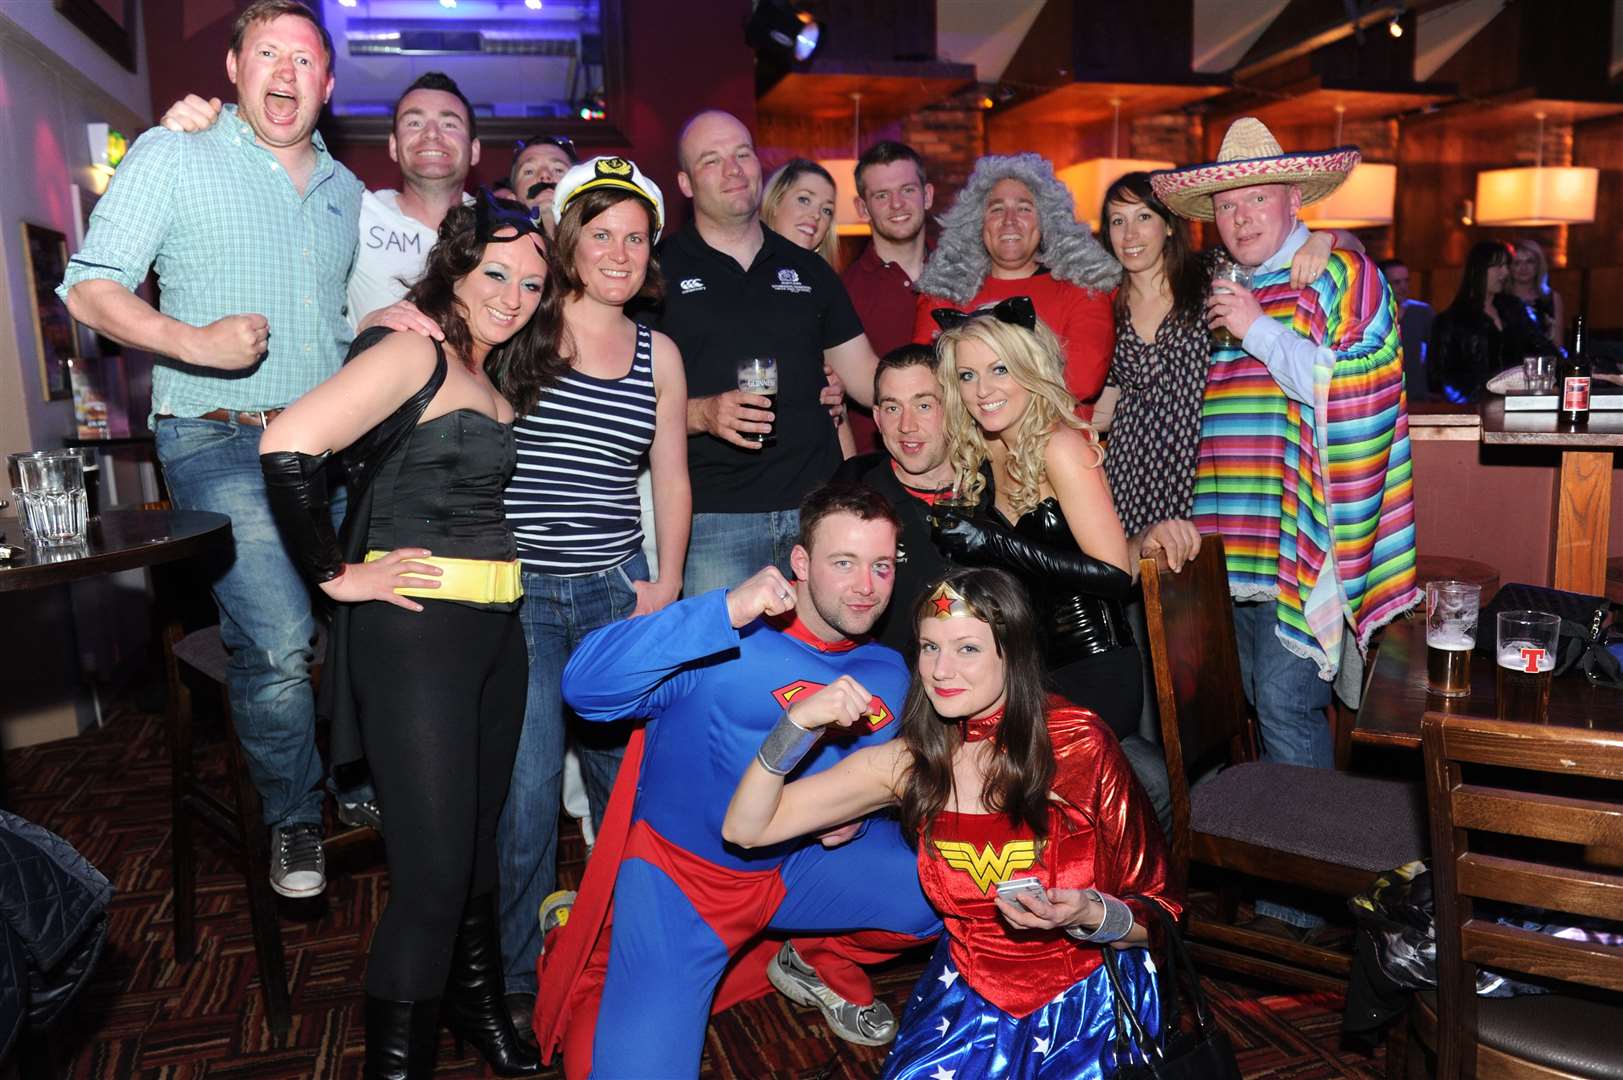 Partying in fancy dress after competing in the Highland Rugby 7's tournament are the Stormrider Barbarians.